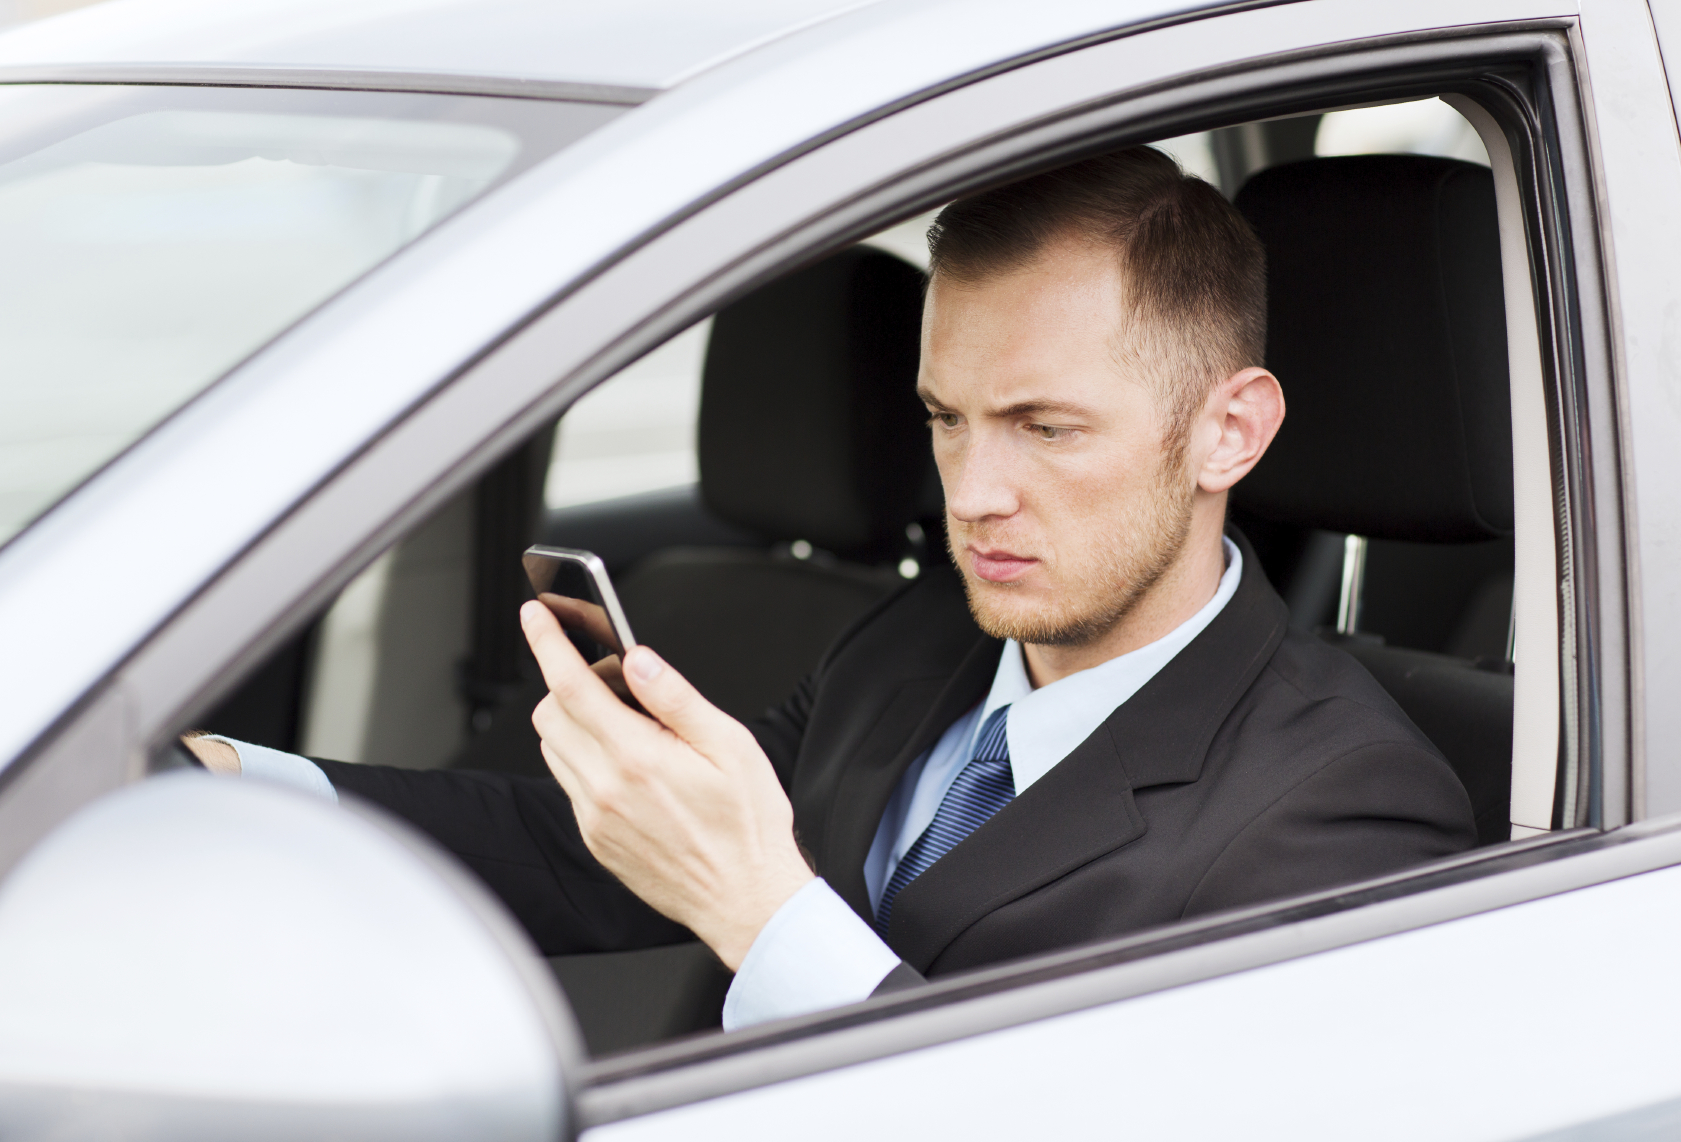 Safety National Introduces Distracted Driving Course to Help Prevent Work-Related Vehicle Accidents